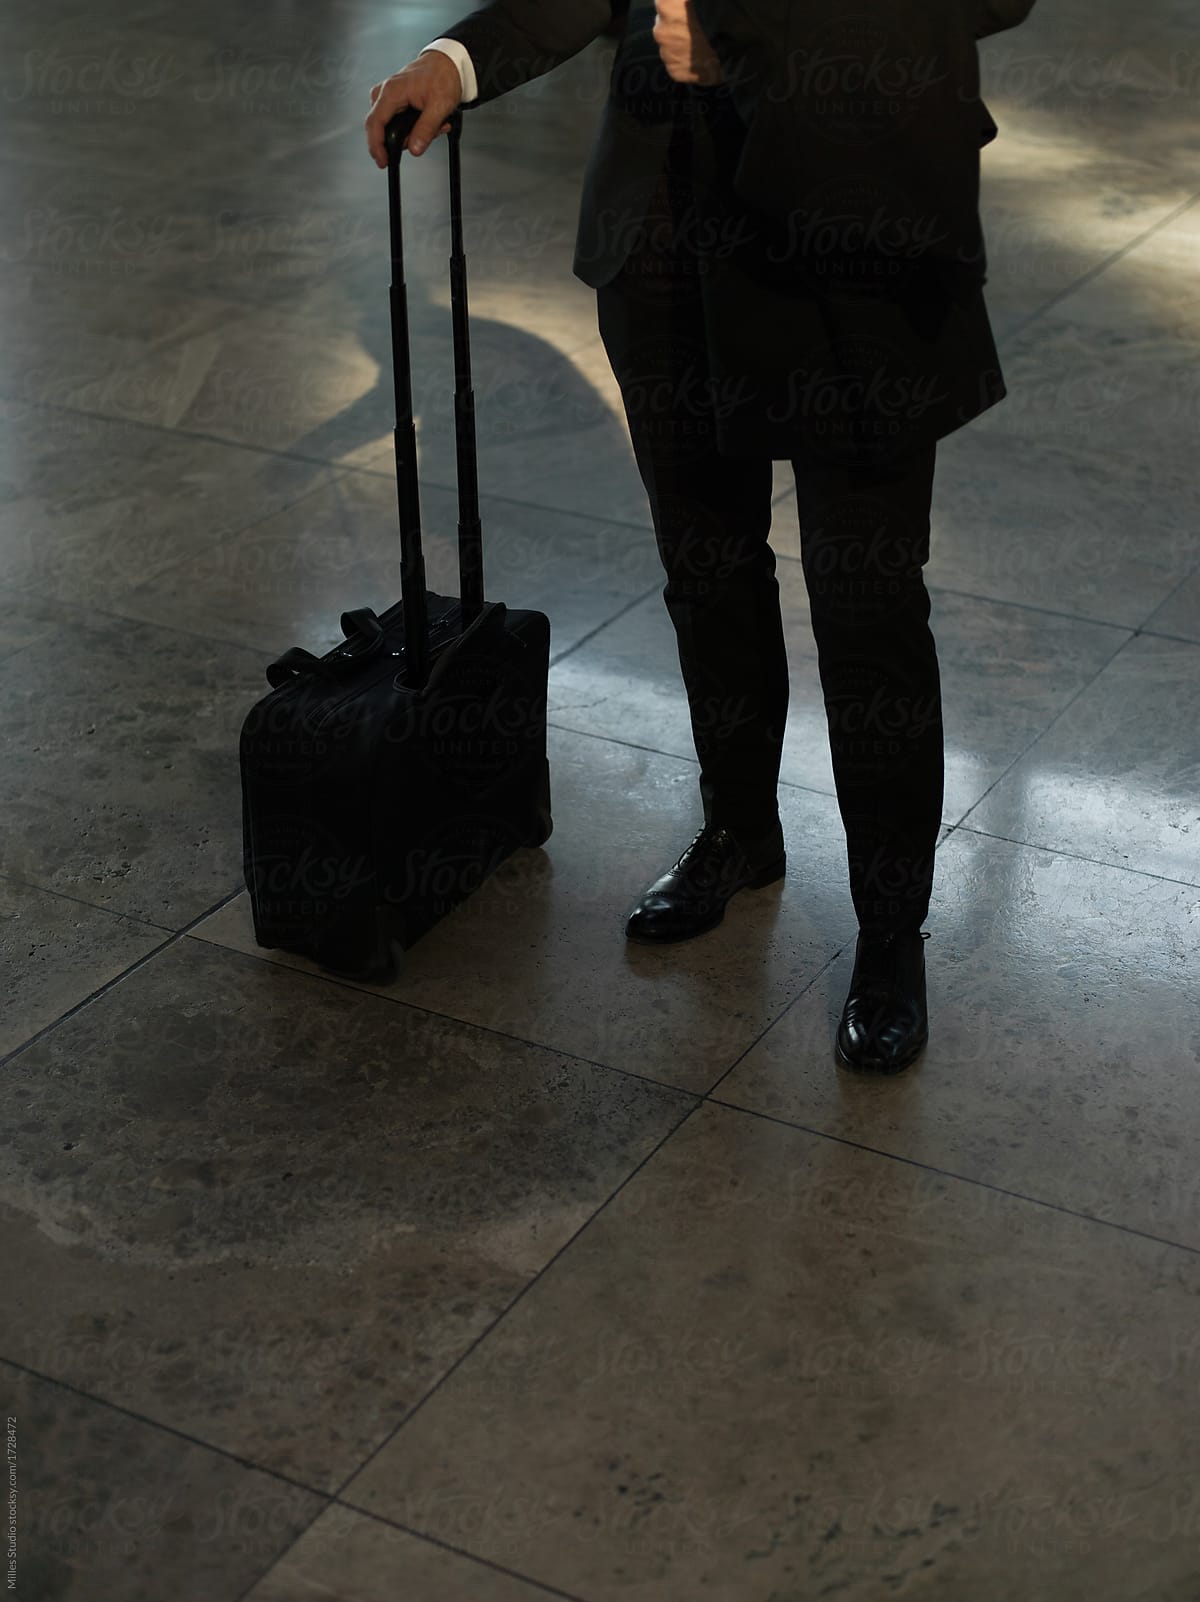 Crop man in black standing with suitcase